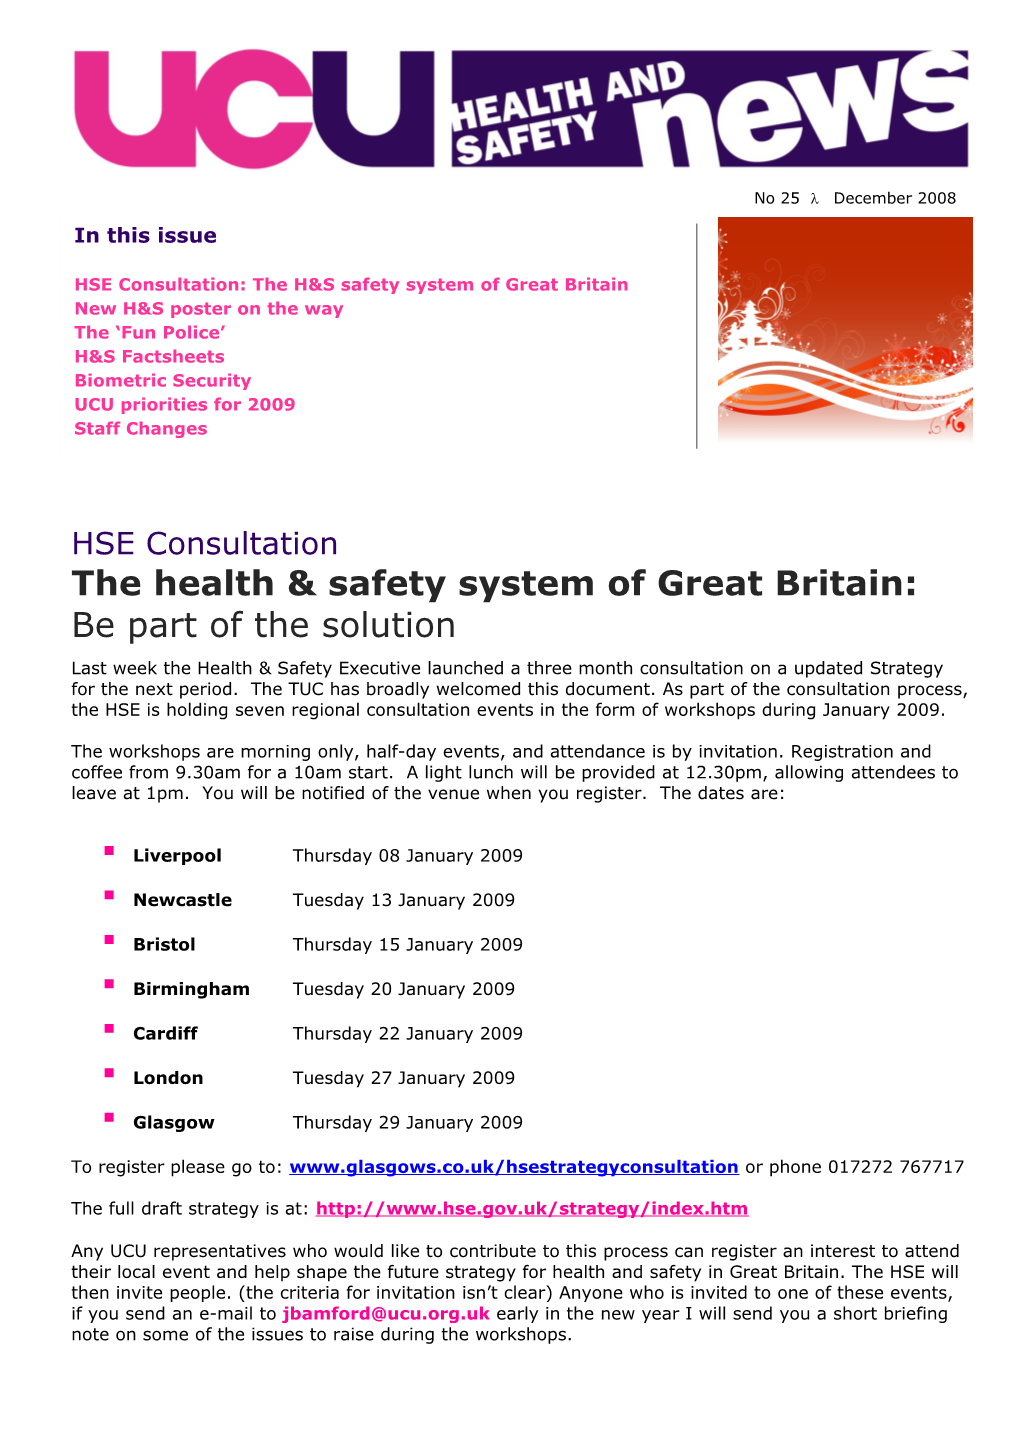 The Health & Safety System of Great Britain: Be Part of the Solution